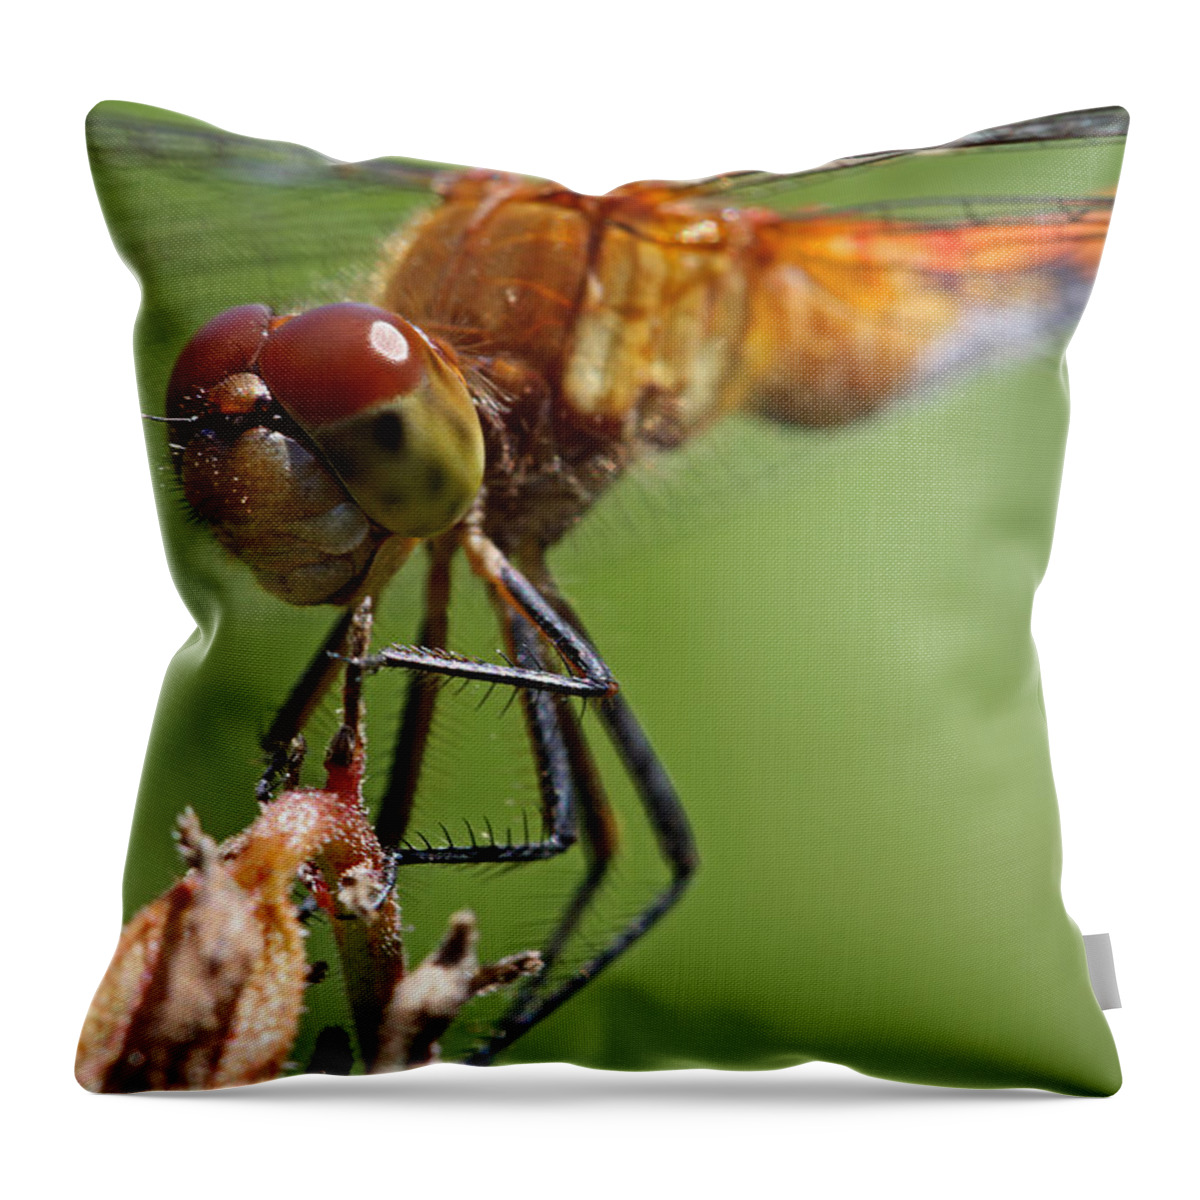 Dragonfly Throw Pillow featuring the photograph Yellow-Legged Meadowhawk Dragonfly by Juergen Roth